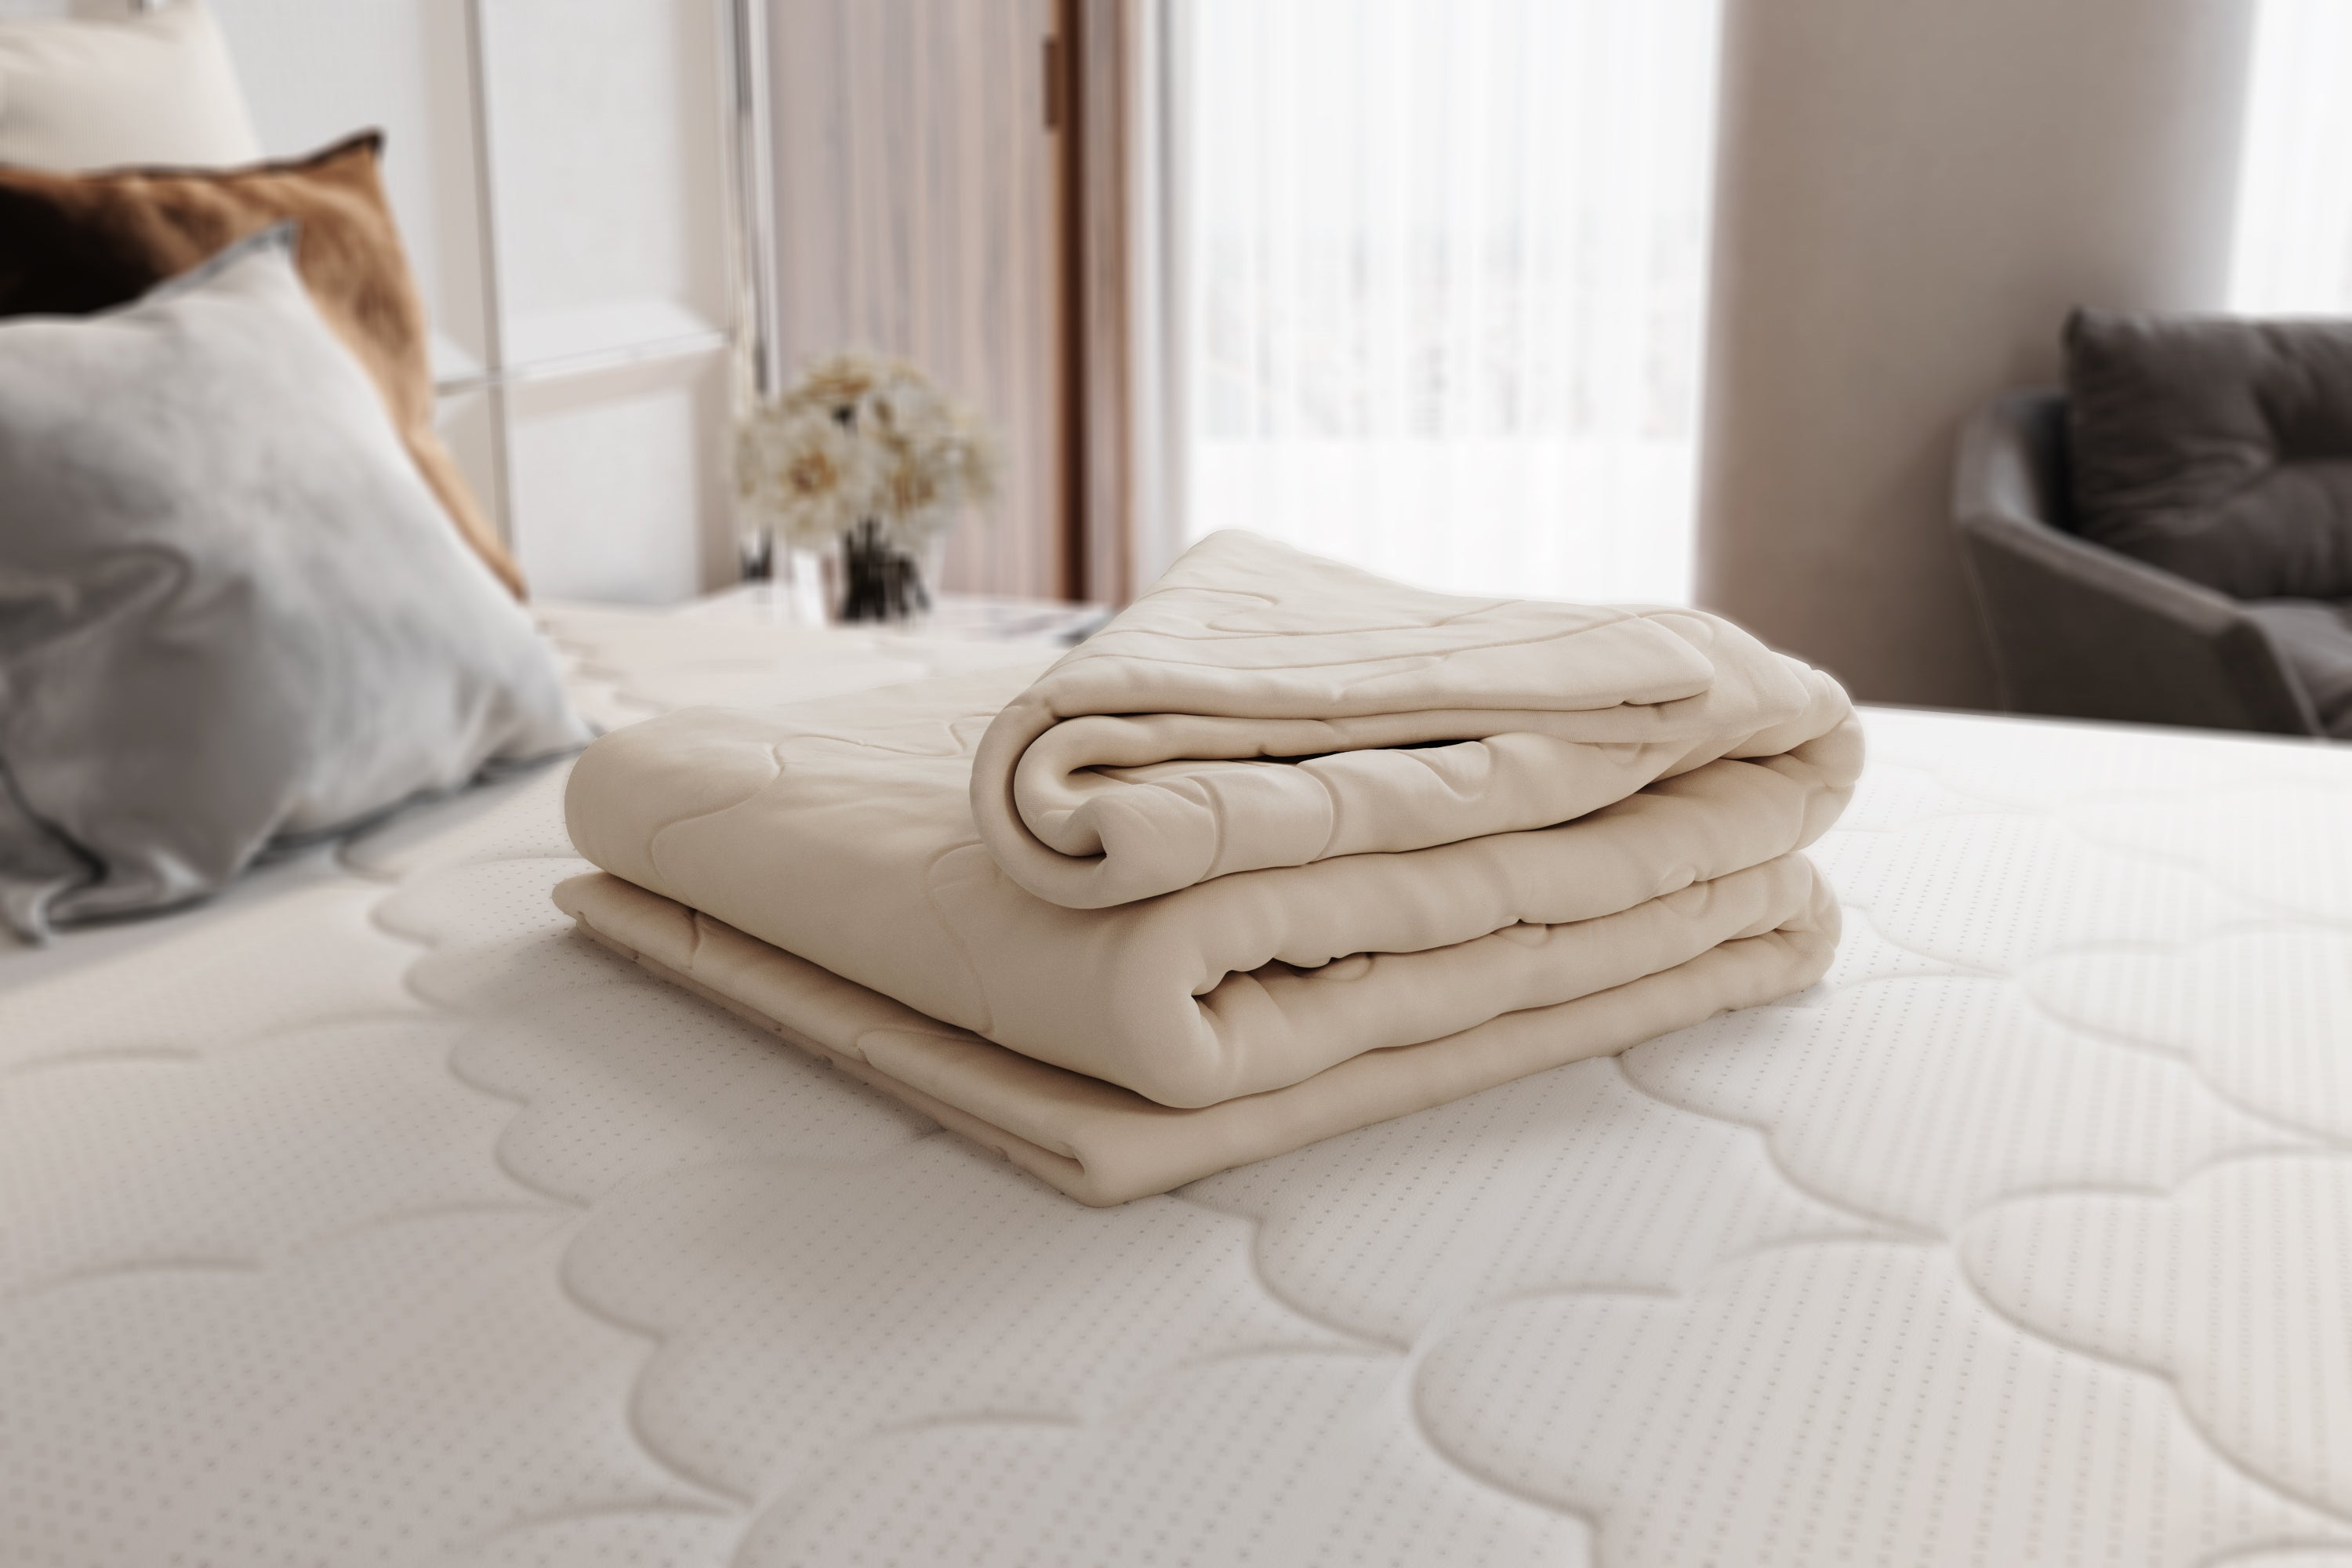 https://cdn.shopify.com/s/files/1/0059/6525/0596/products/Wool_Comforter_Lifestyle_157100.jpg?v=1581355839